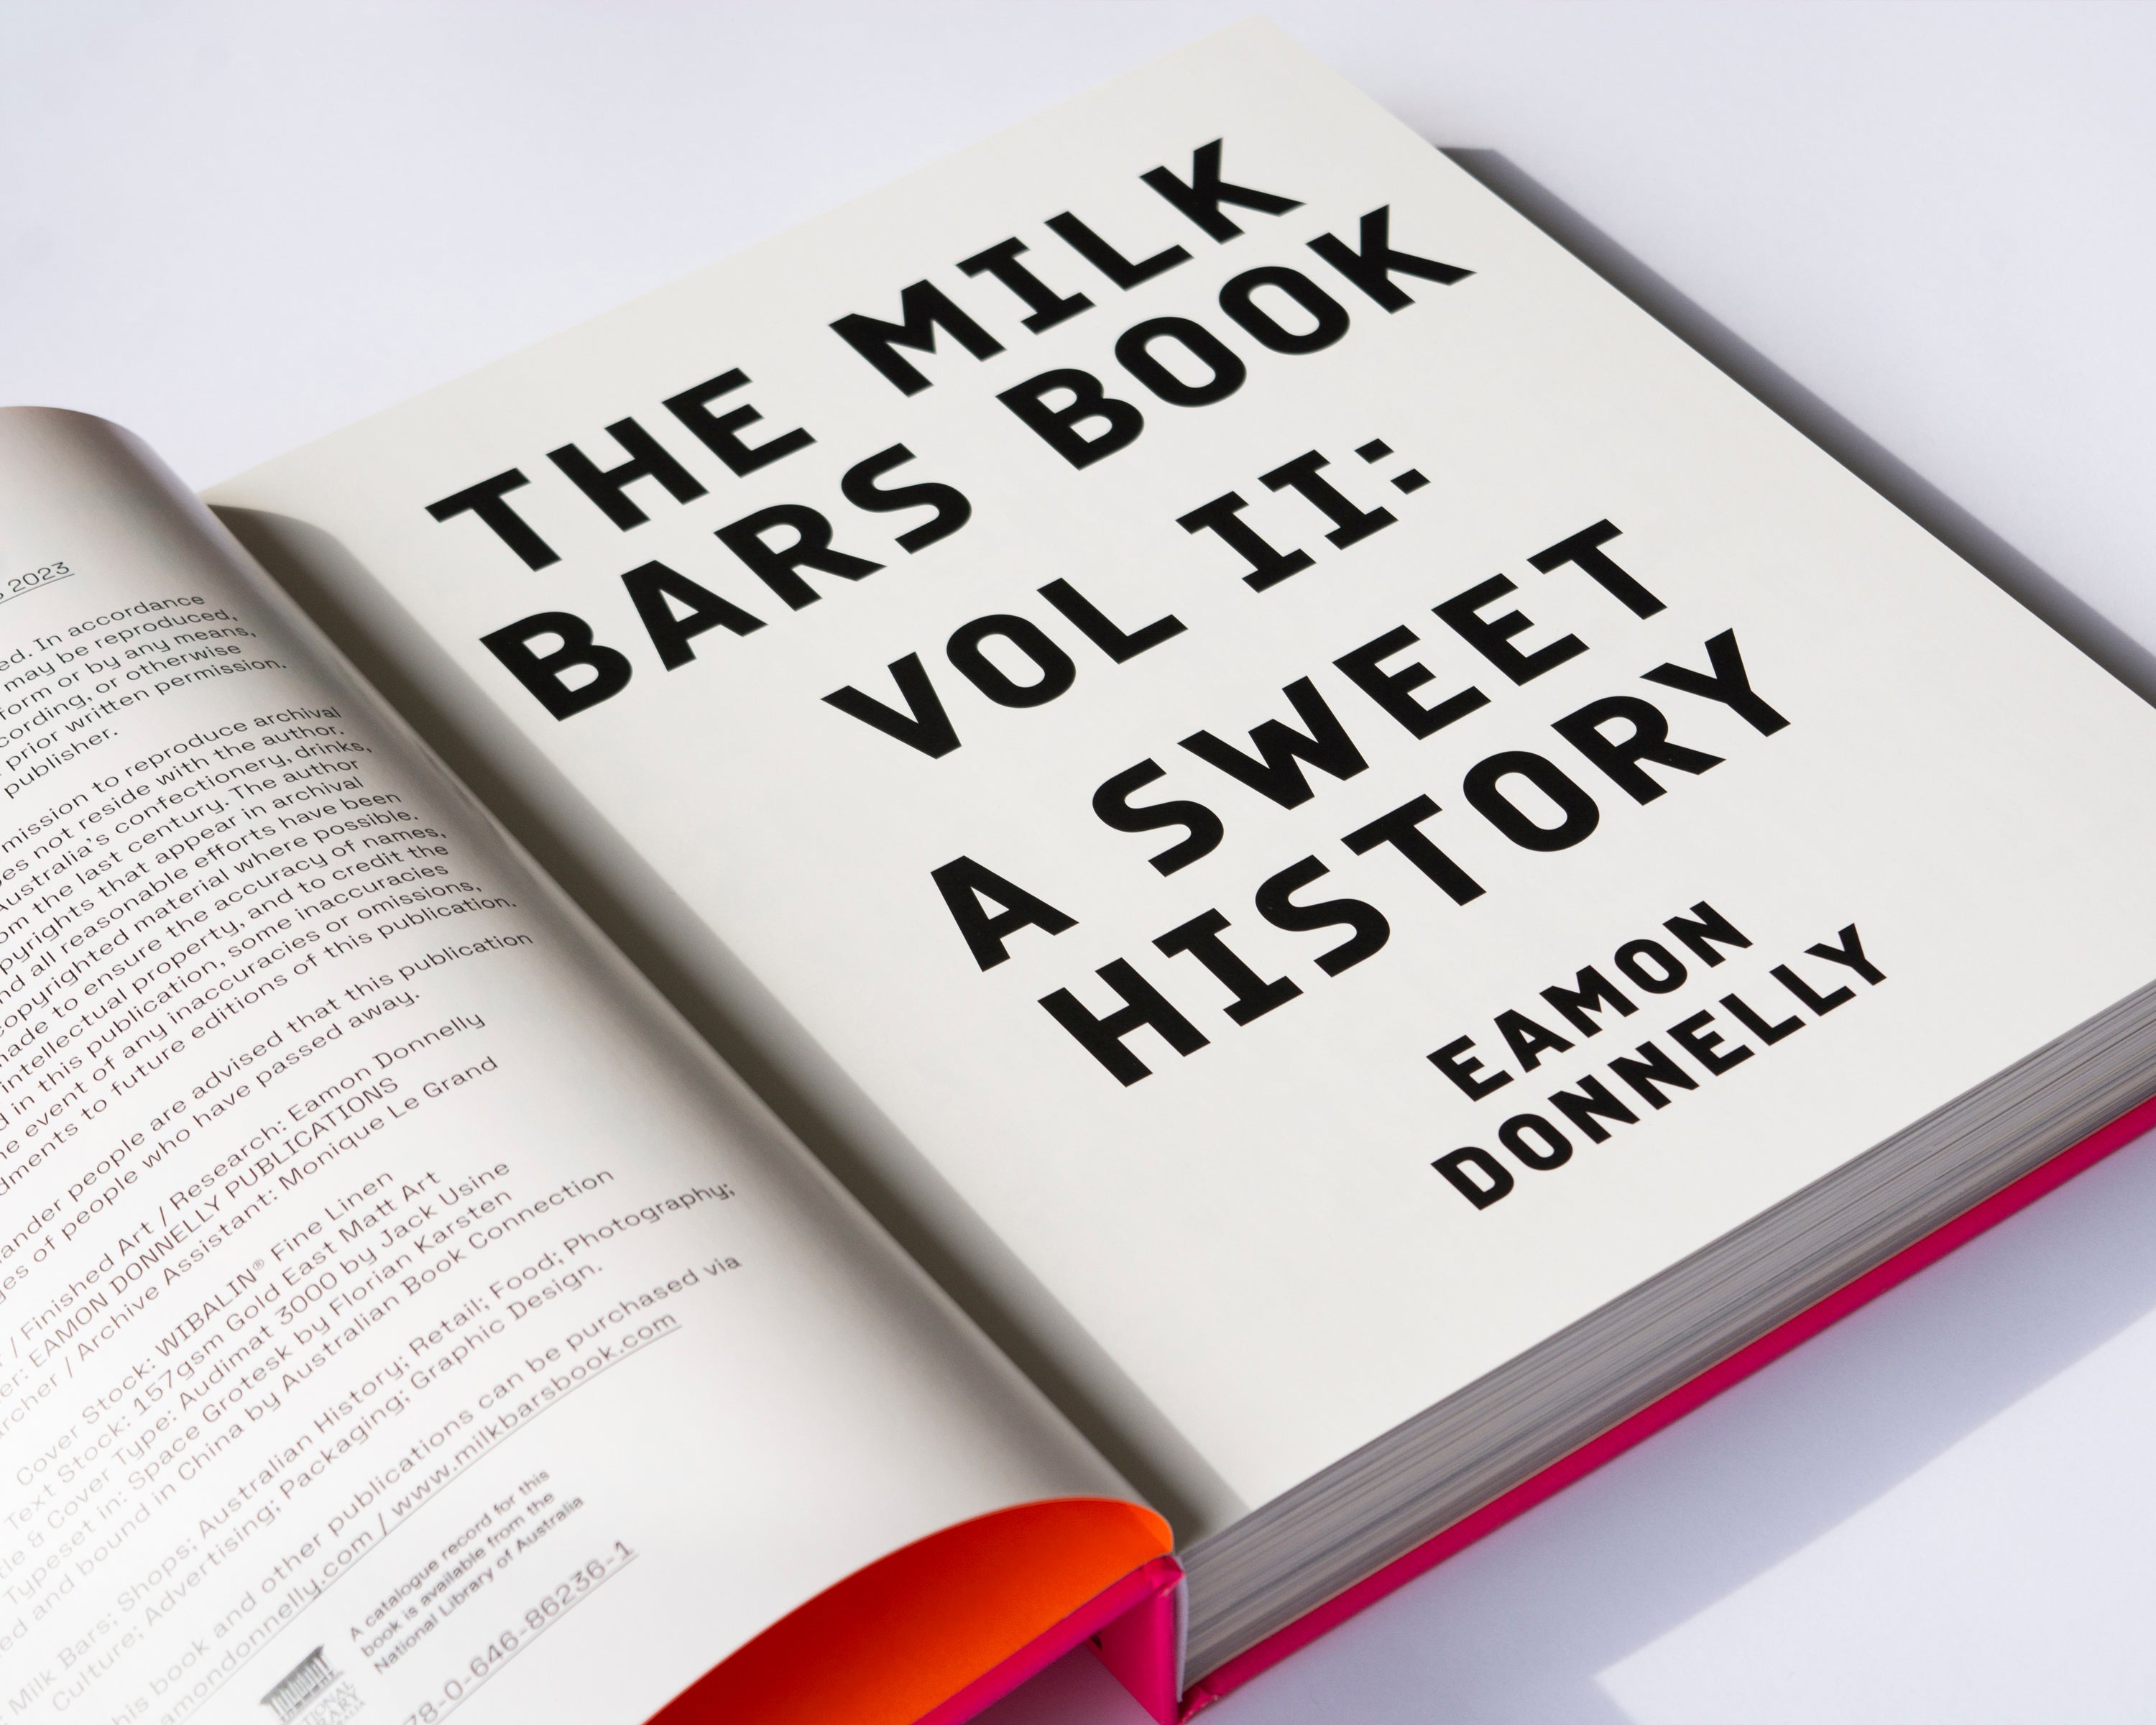 The Milk Bars Book. Volume II: A Sweet History — All Cover Colours Bundle Discount "Collect Them All!"